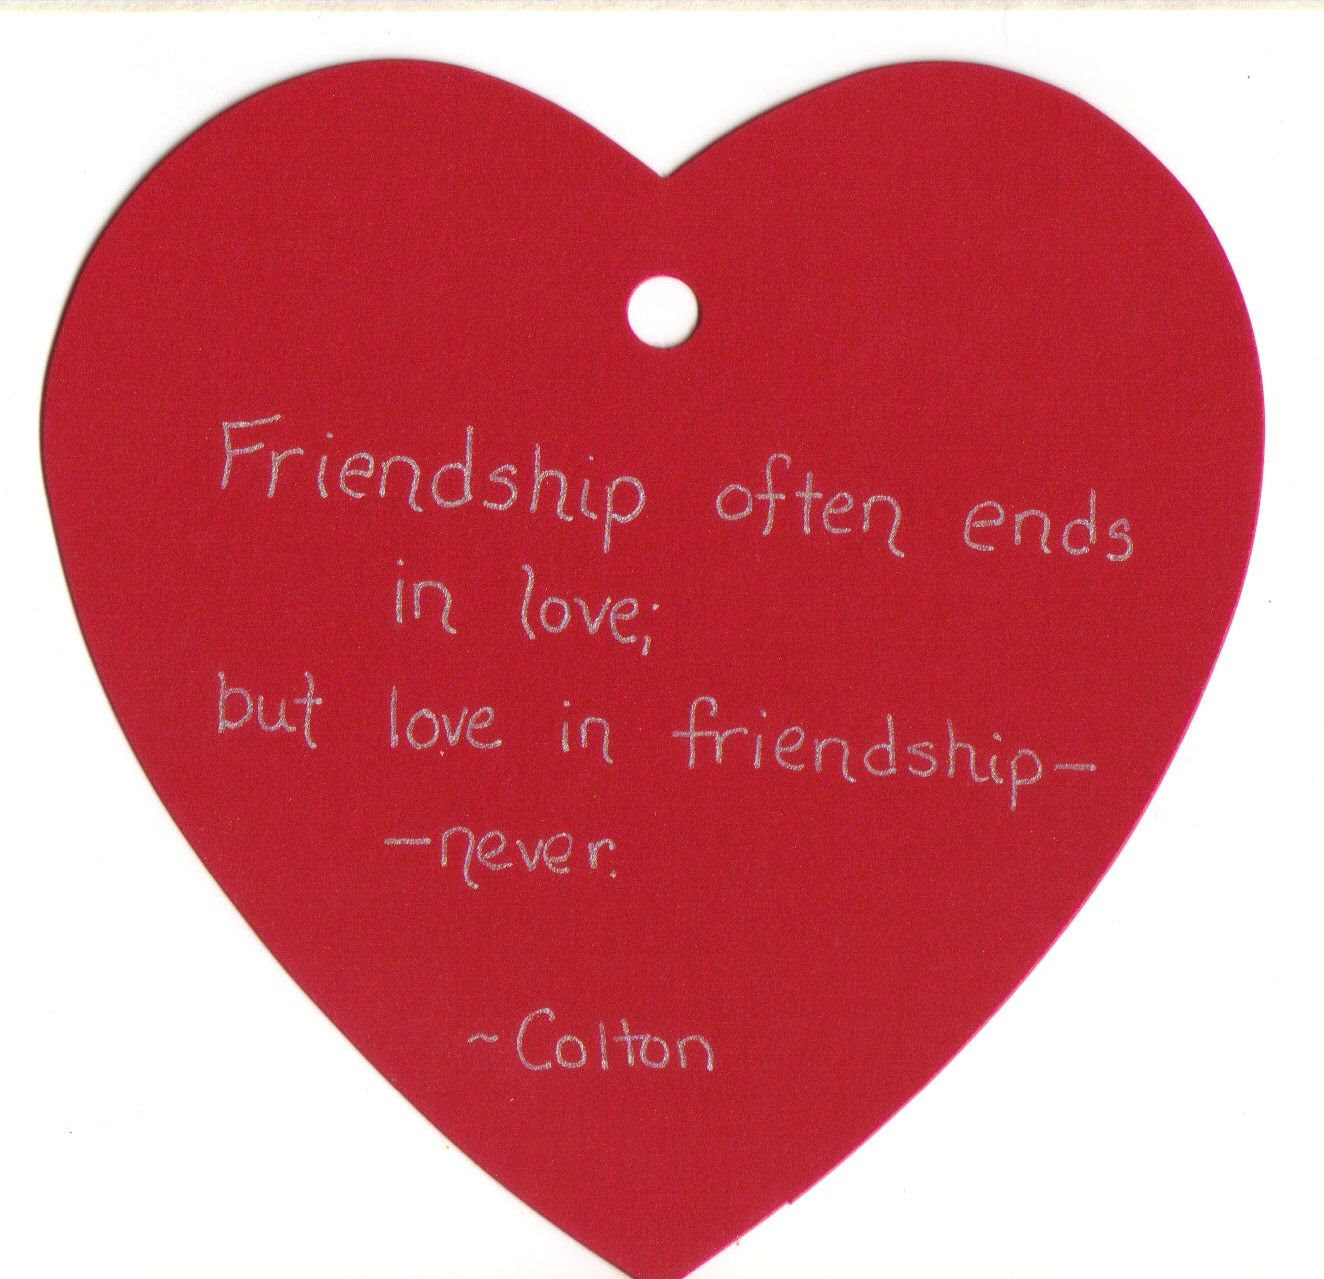 Love Triangle Quotes Pinterest